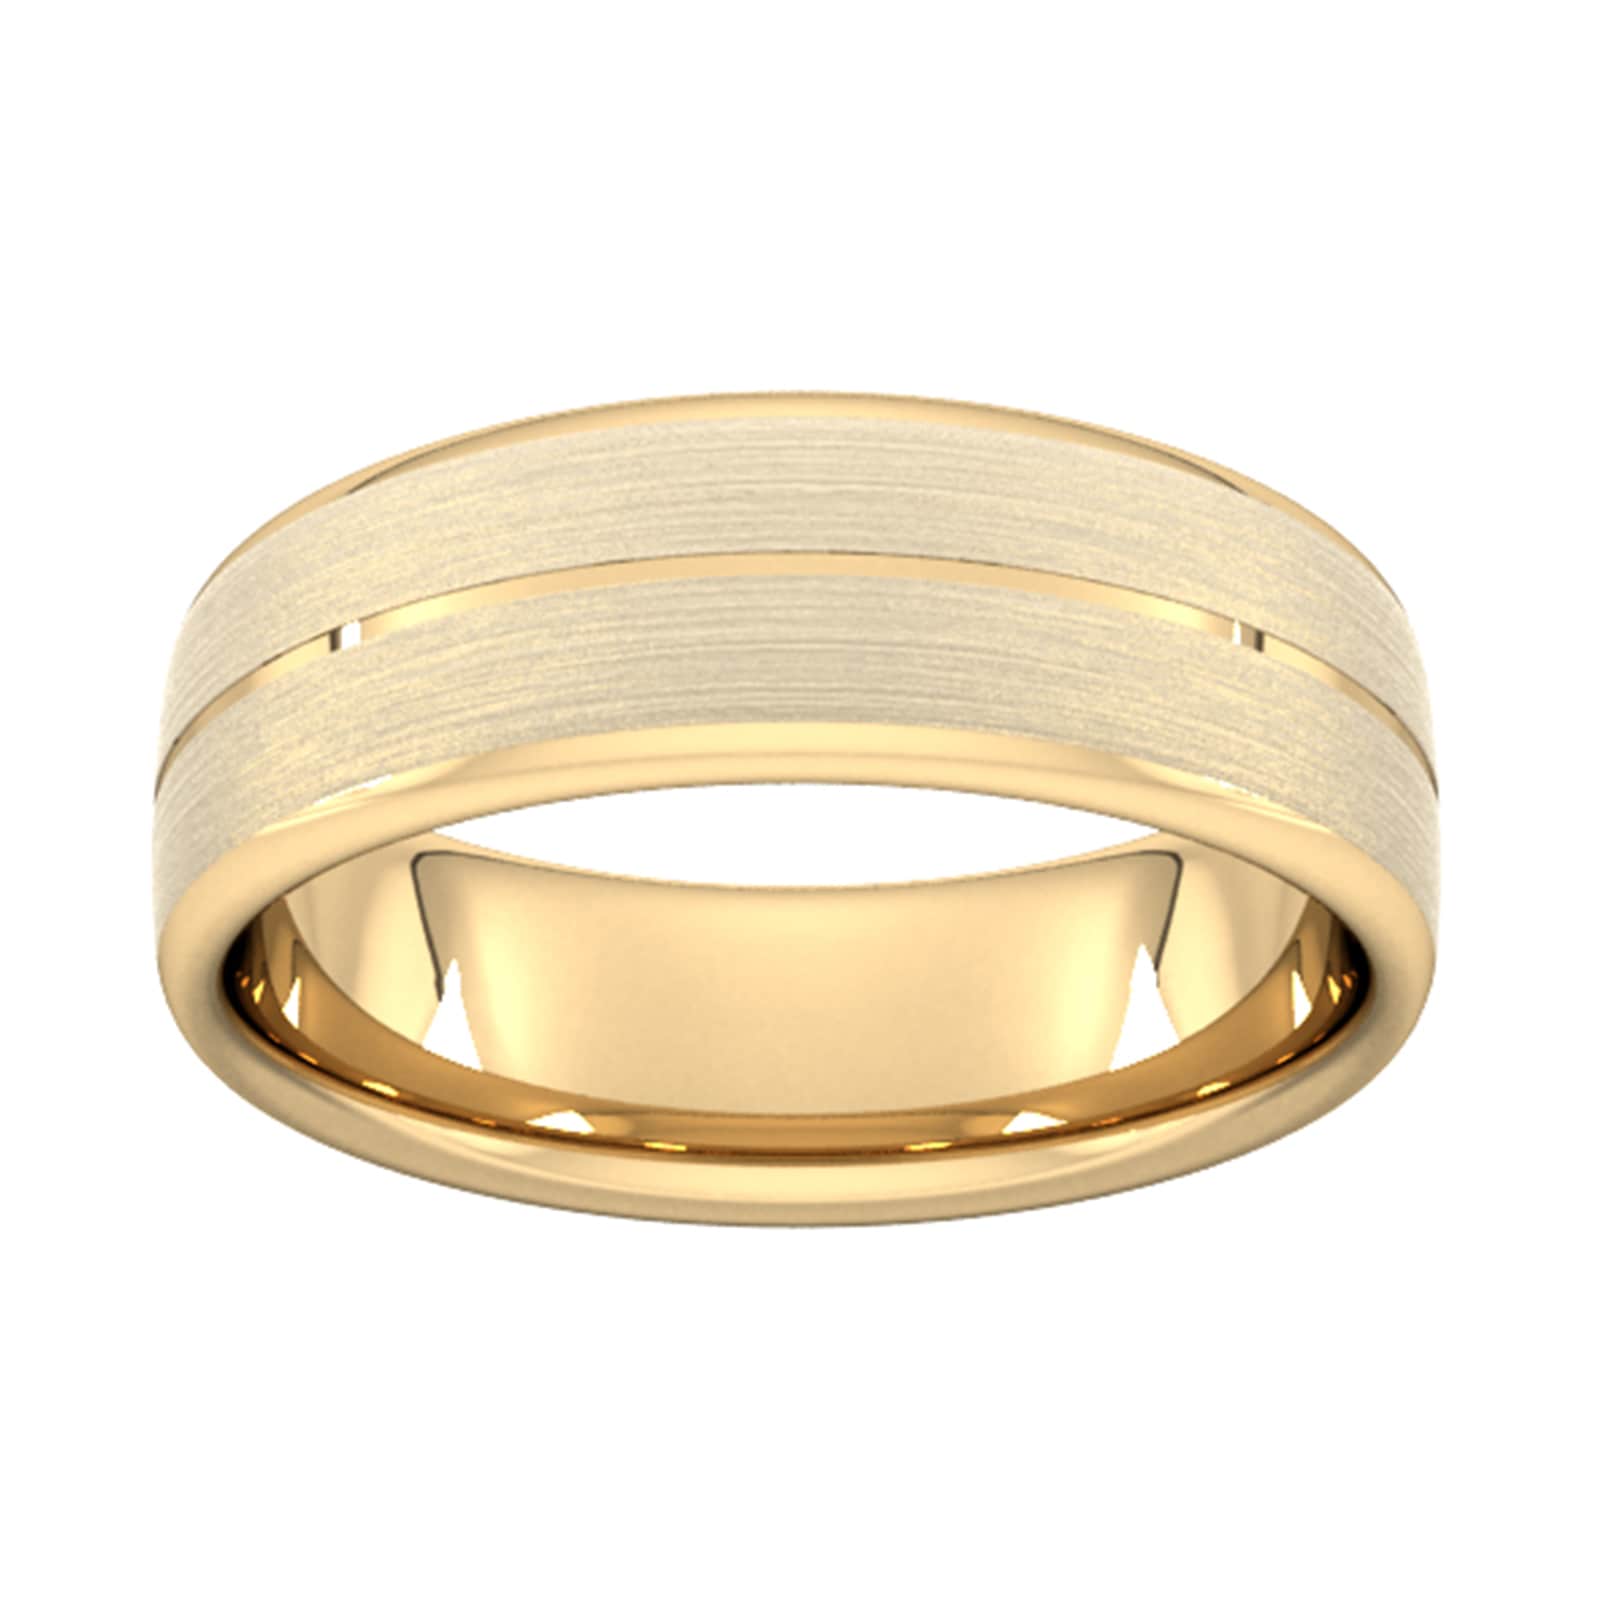 7mm Traditional Court Heavy Centre Groove With Chamfered Edge Wedding Ring In 9 Carat Yellow Gold - Ring Size X